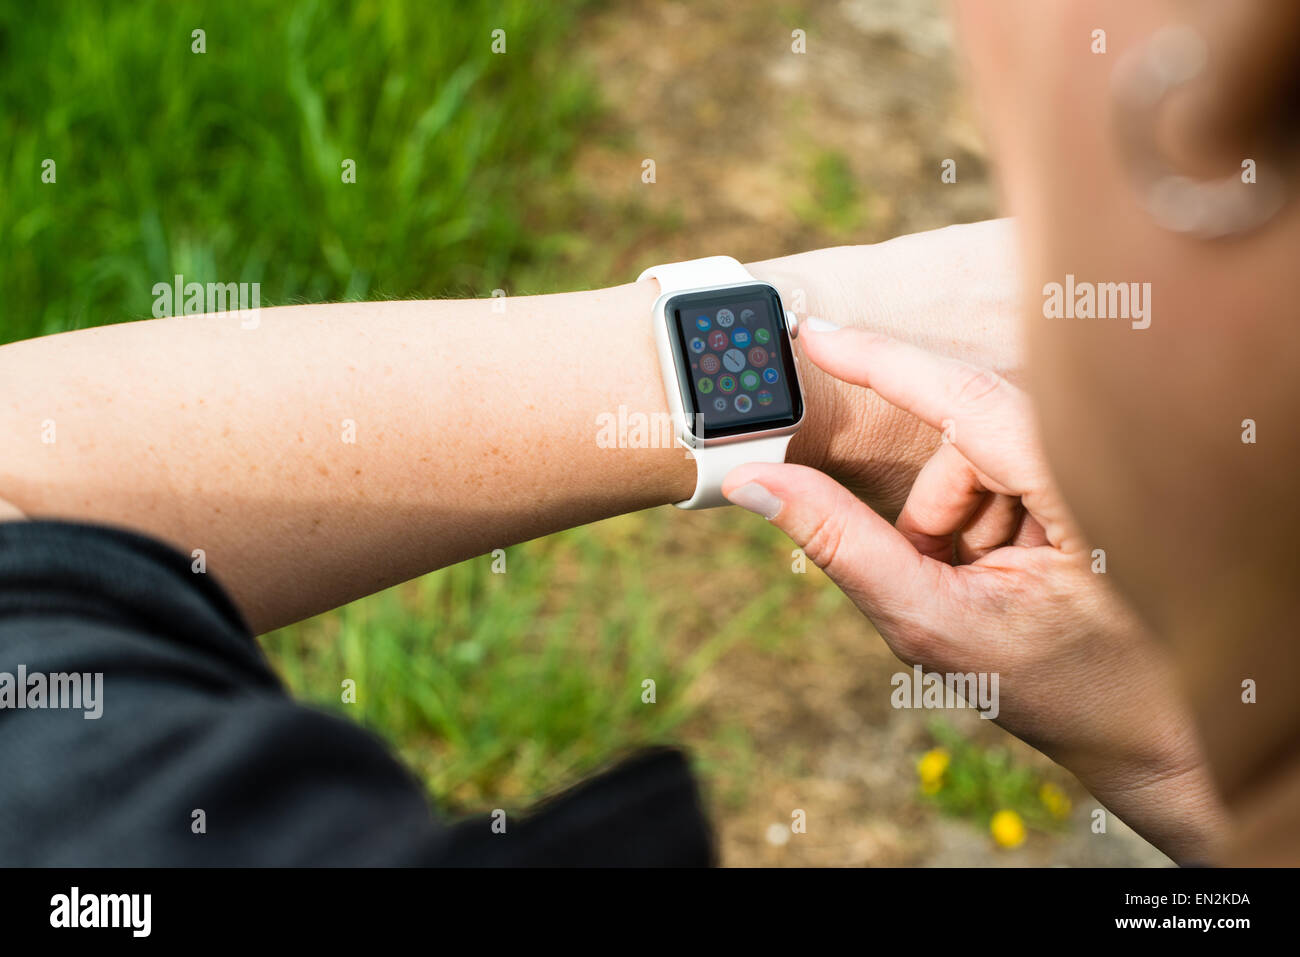 Ostfildern, Germany - April 26, 2015: A middle aged Caucasian woman is checking her Apple Watch displaying the main screen with Stock Photo